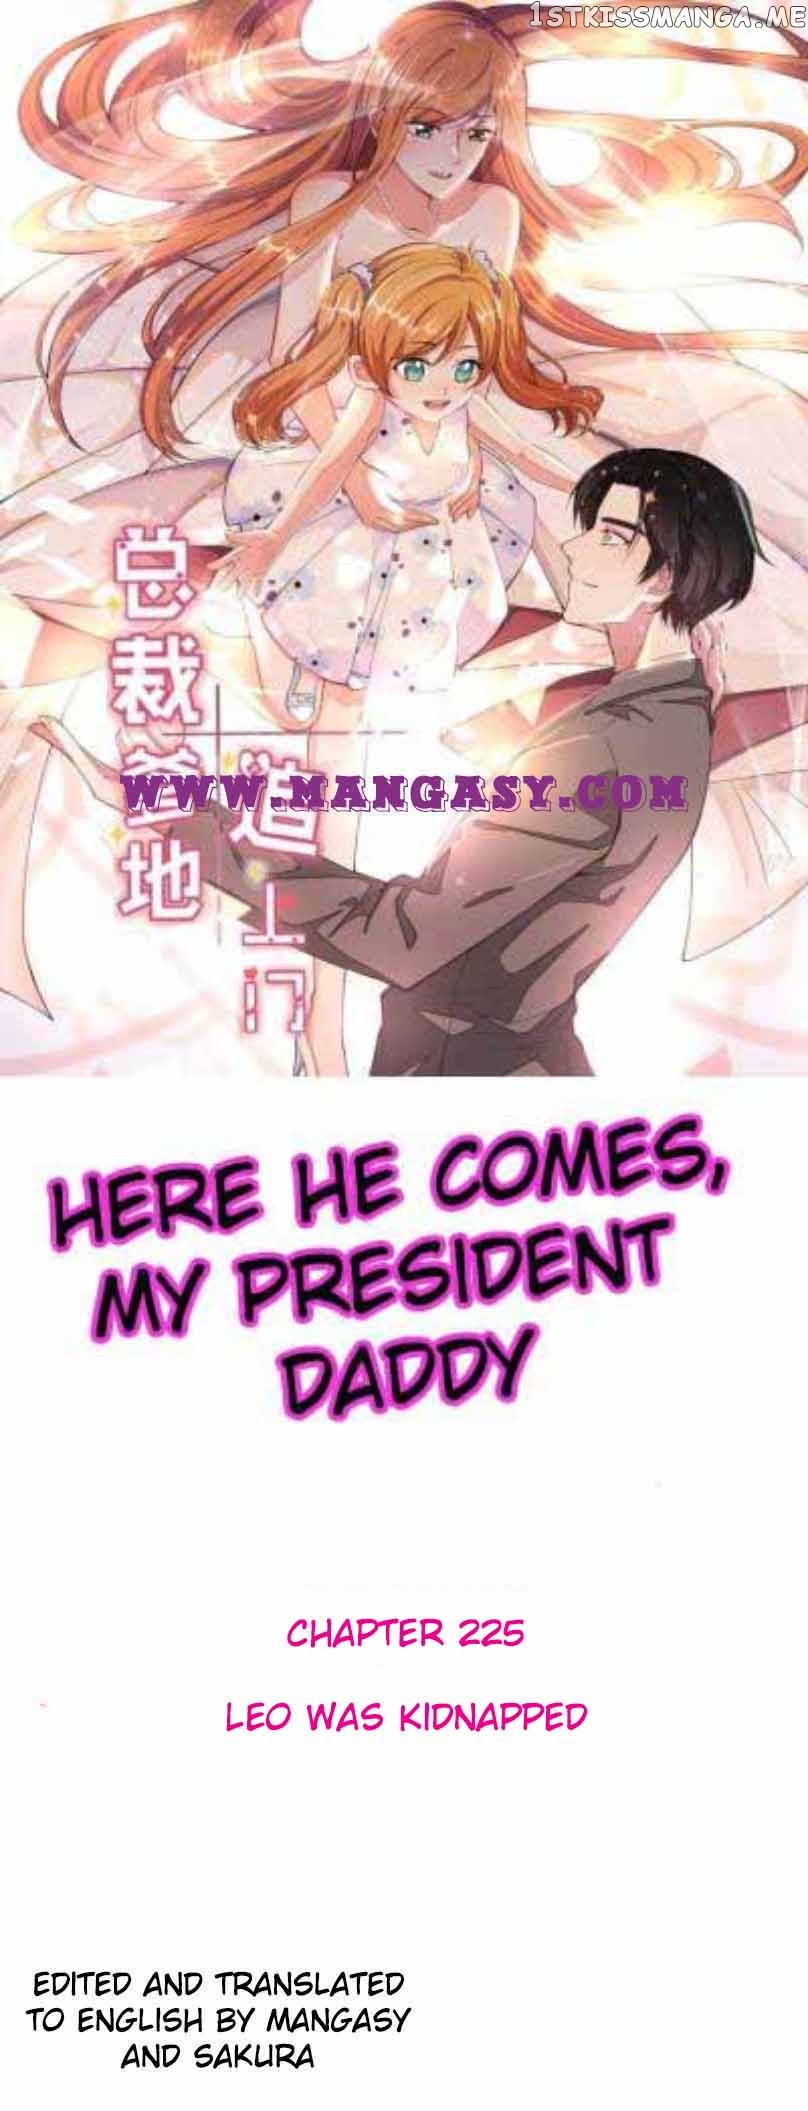 President daddy is chasing you Chapter 225 - page 1